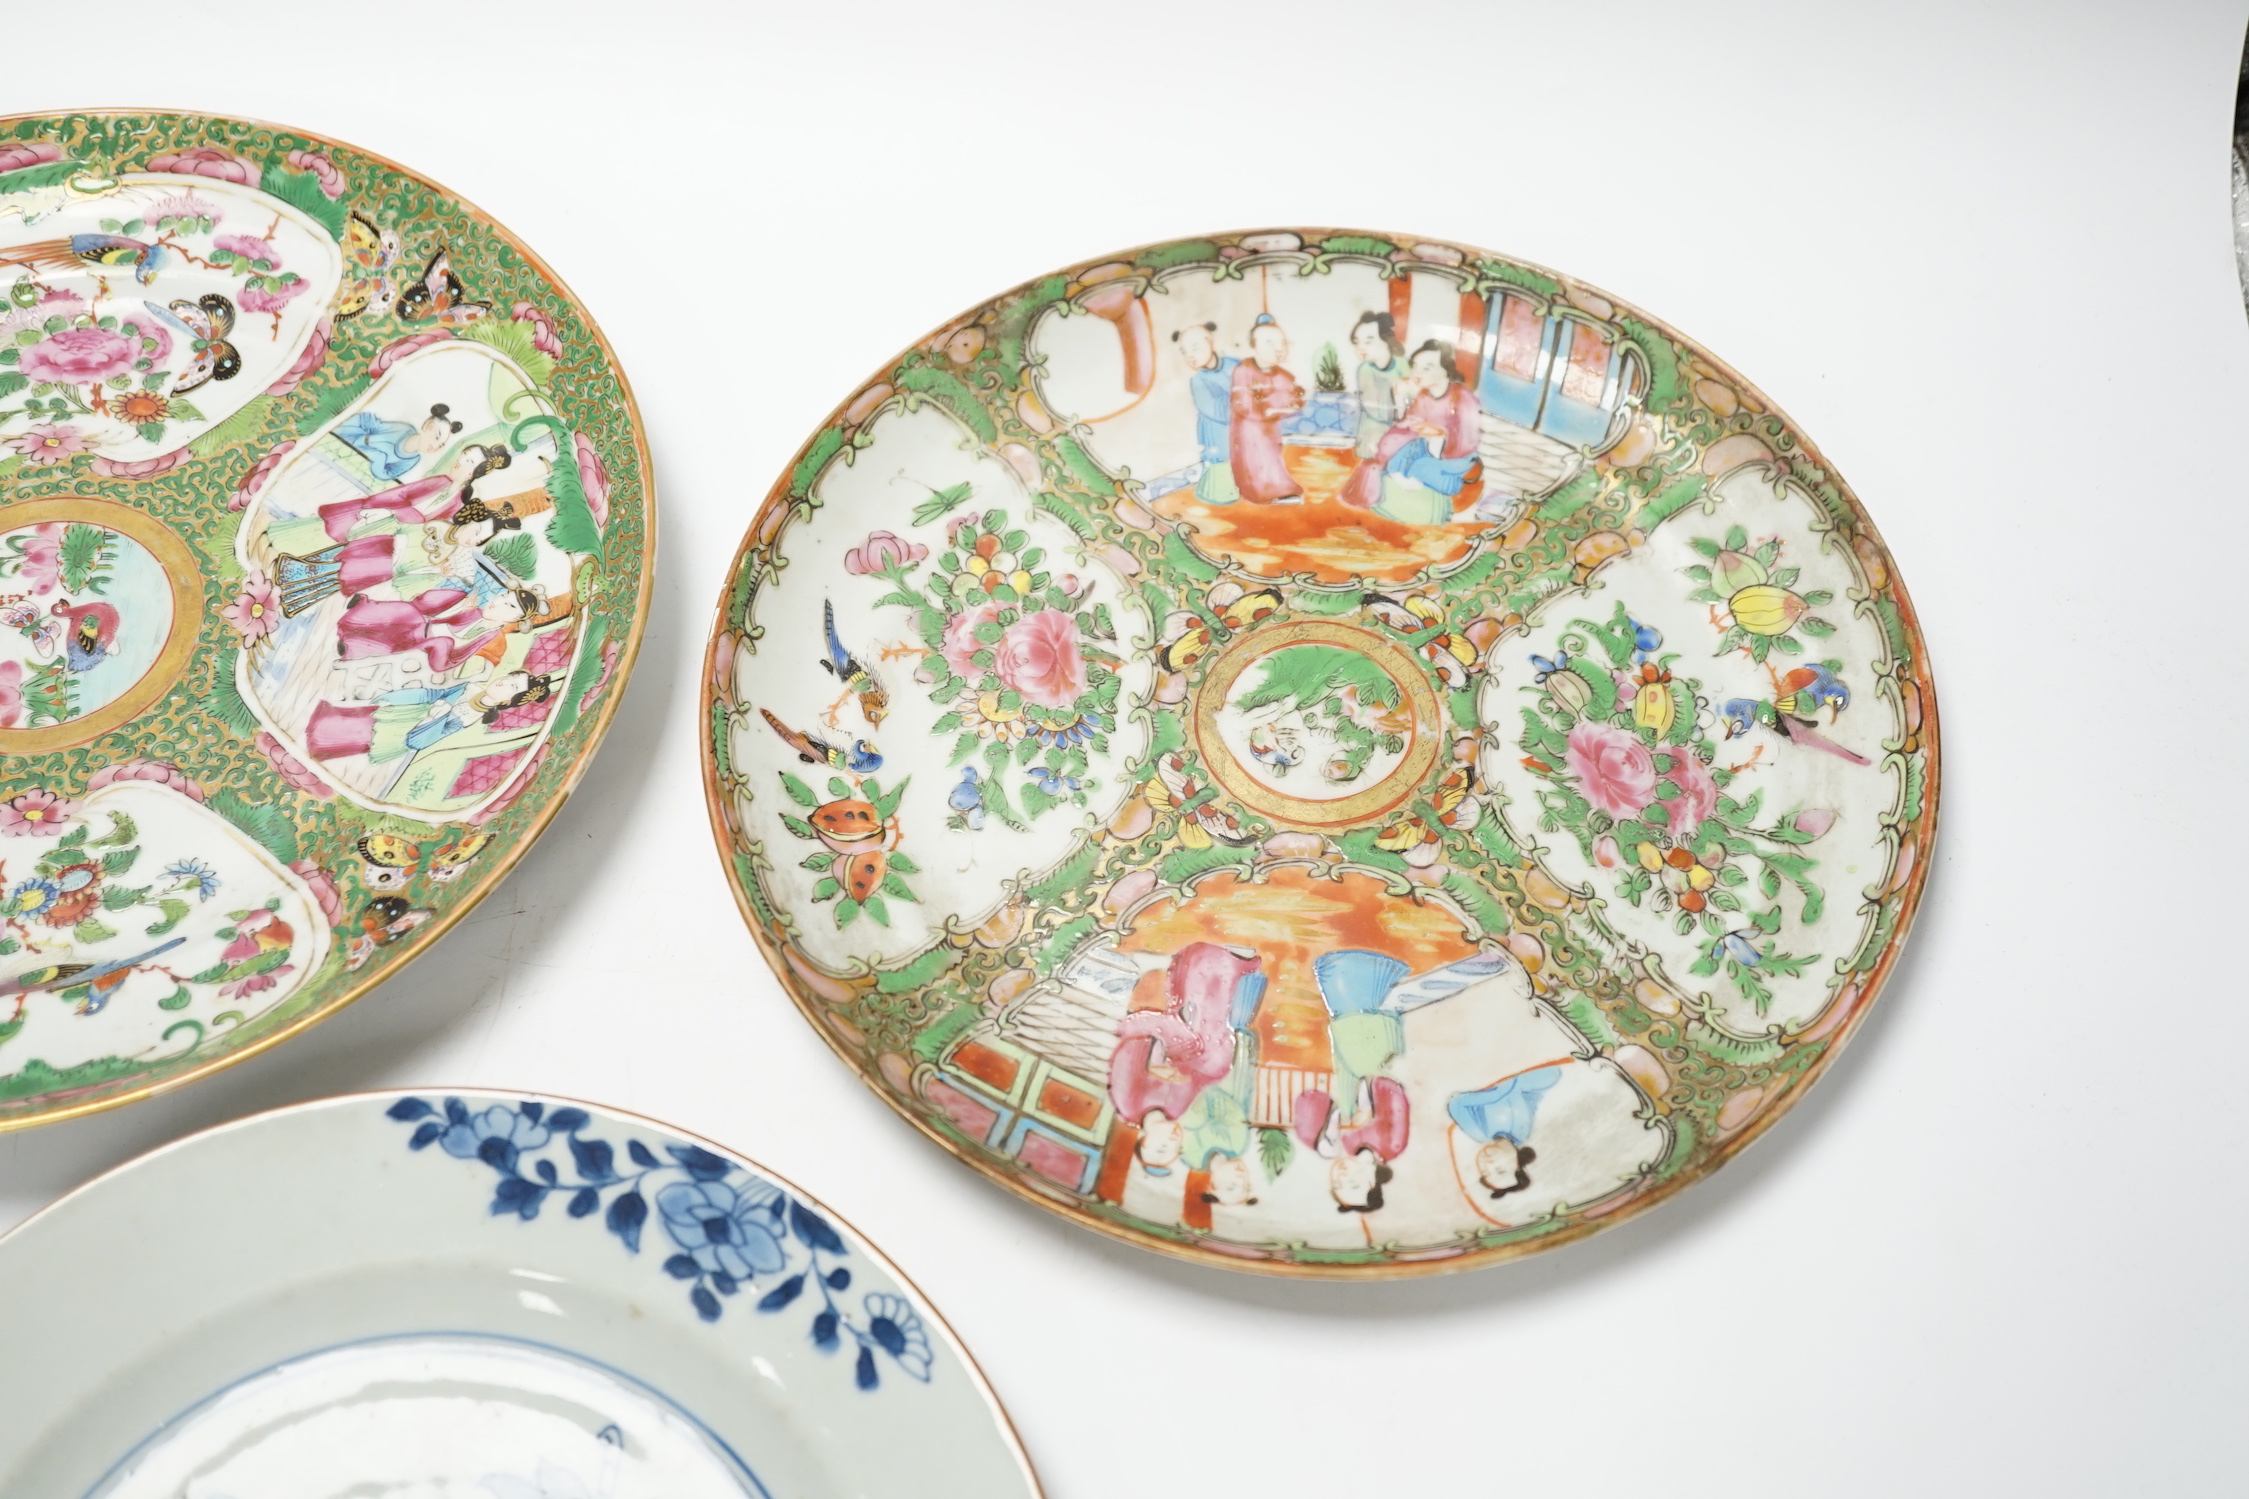 Two 19th century Chinese famille rose plates and an 18th century blue and white plate, 24cm in diameter